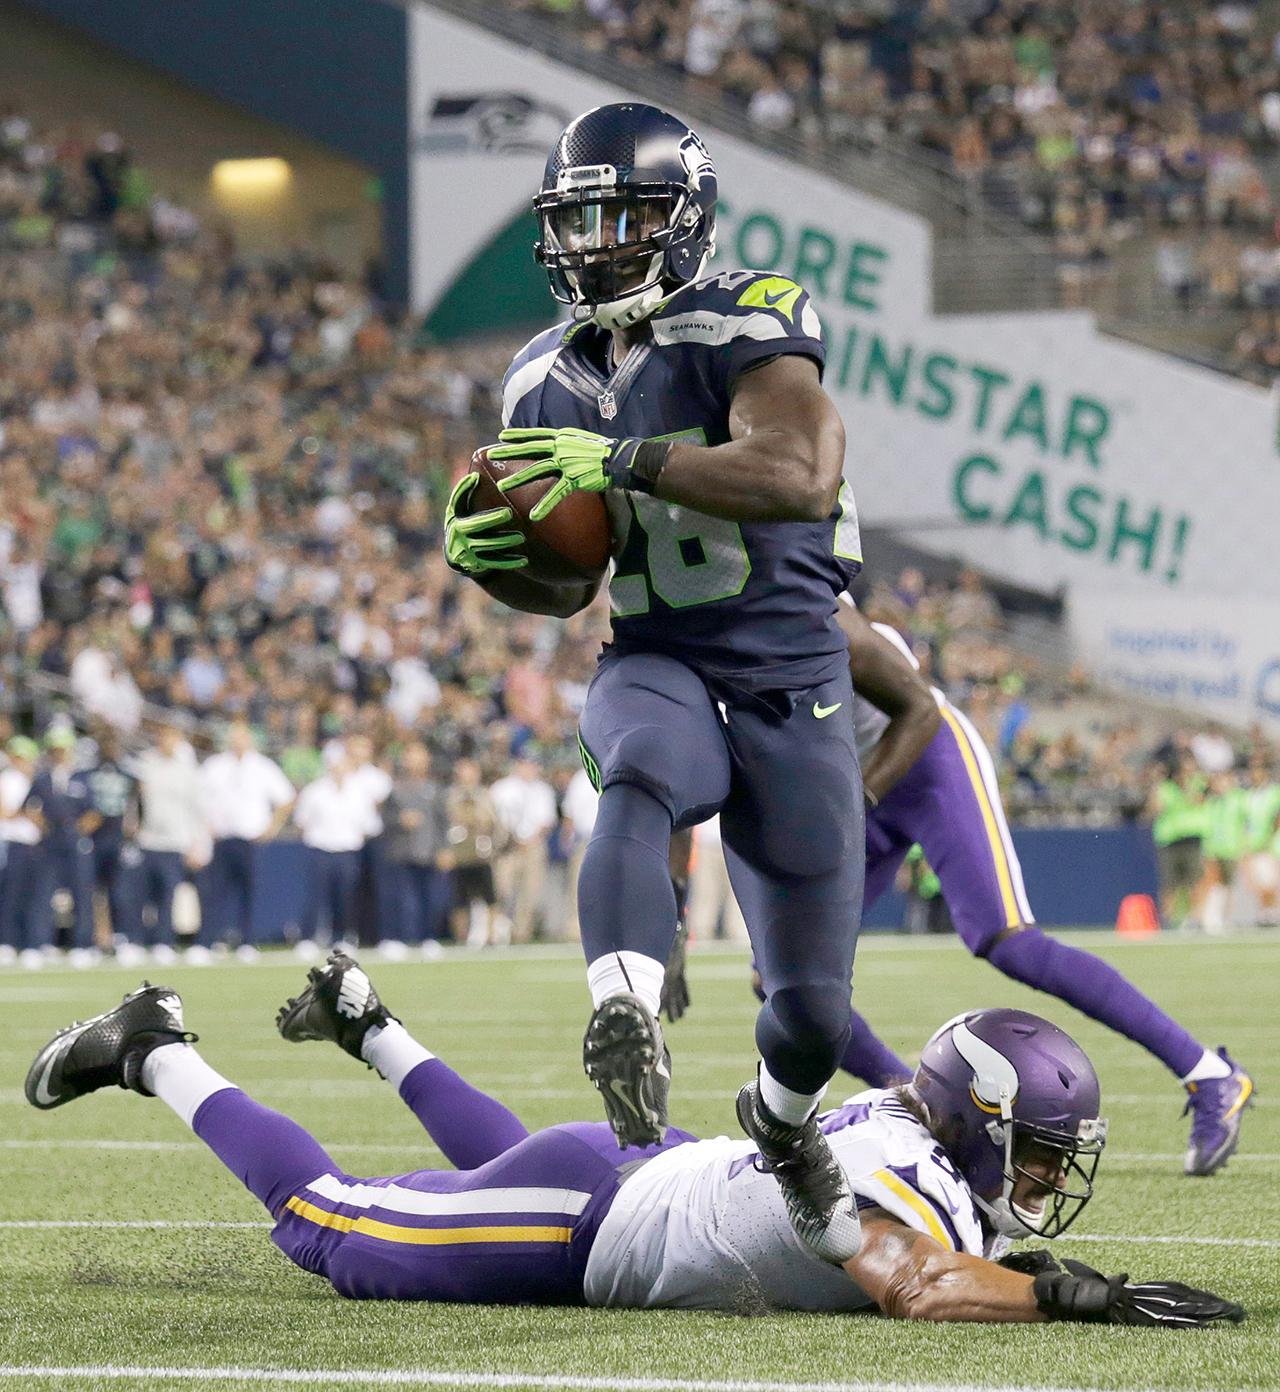 The Associated Press Seattle Seahawks running back Troymaine Pope scores a touchdown after avoiding a tackle from Minnesota Vikings defensive end Justin Trattou during last week’s preseason game.